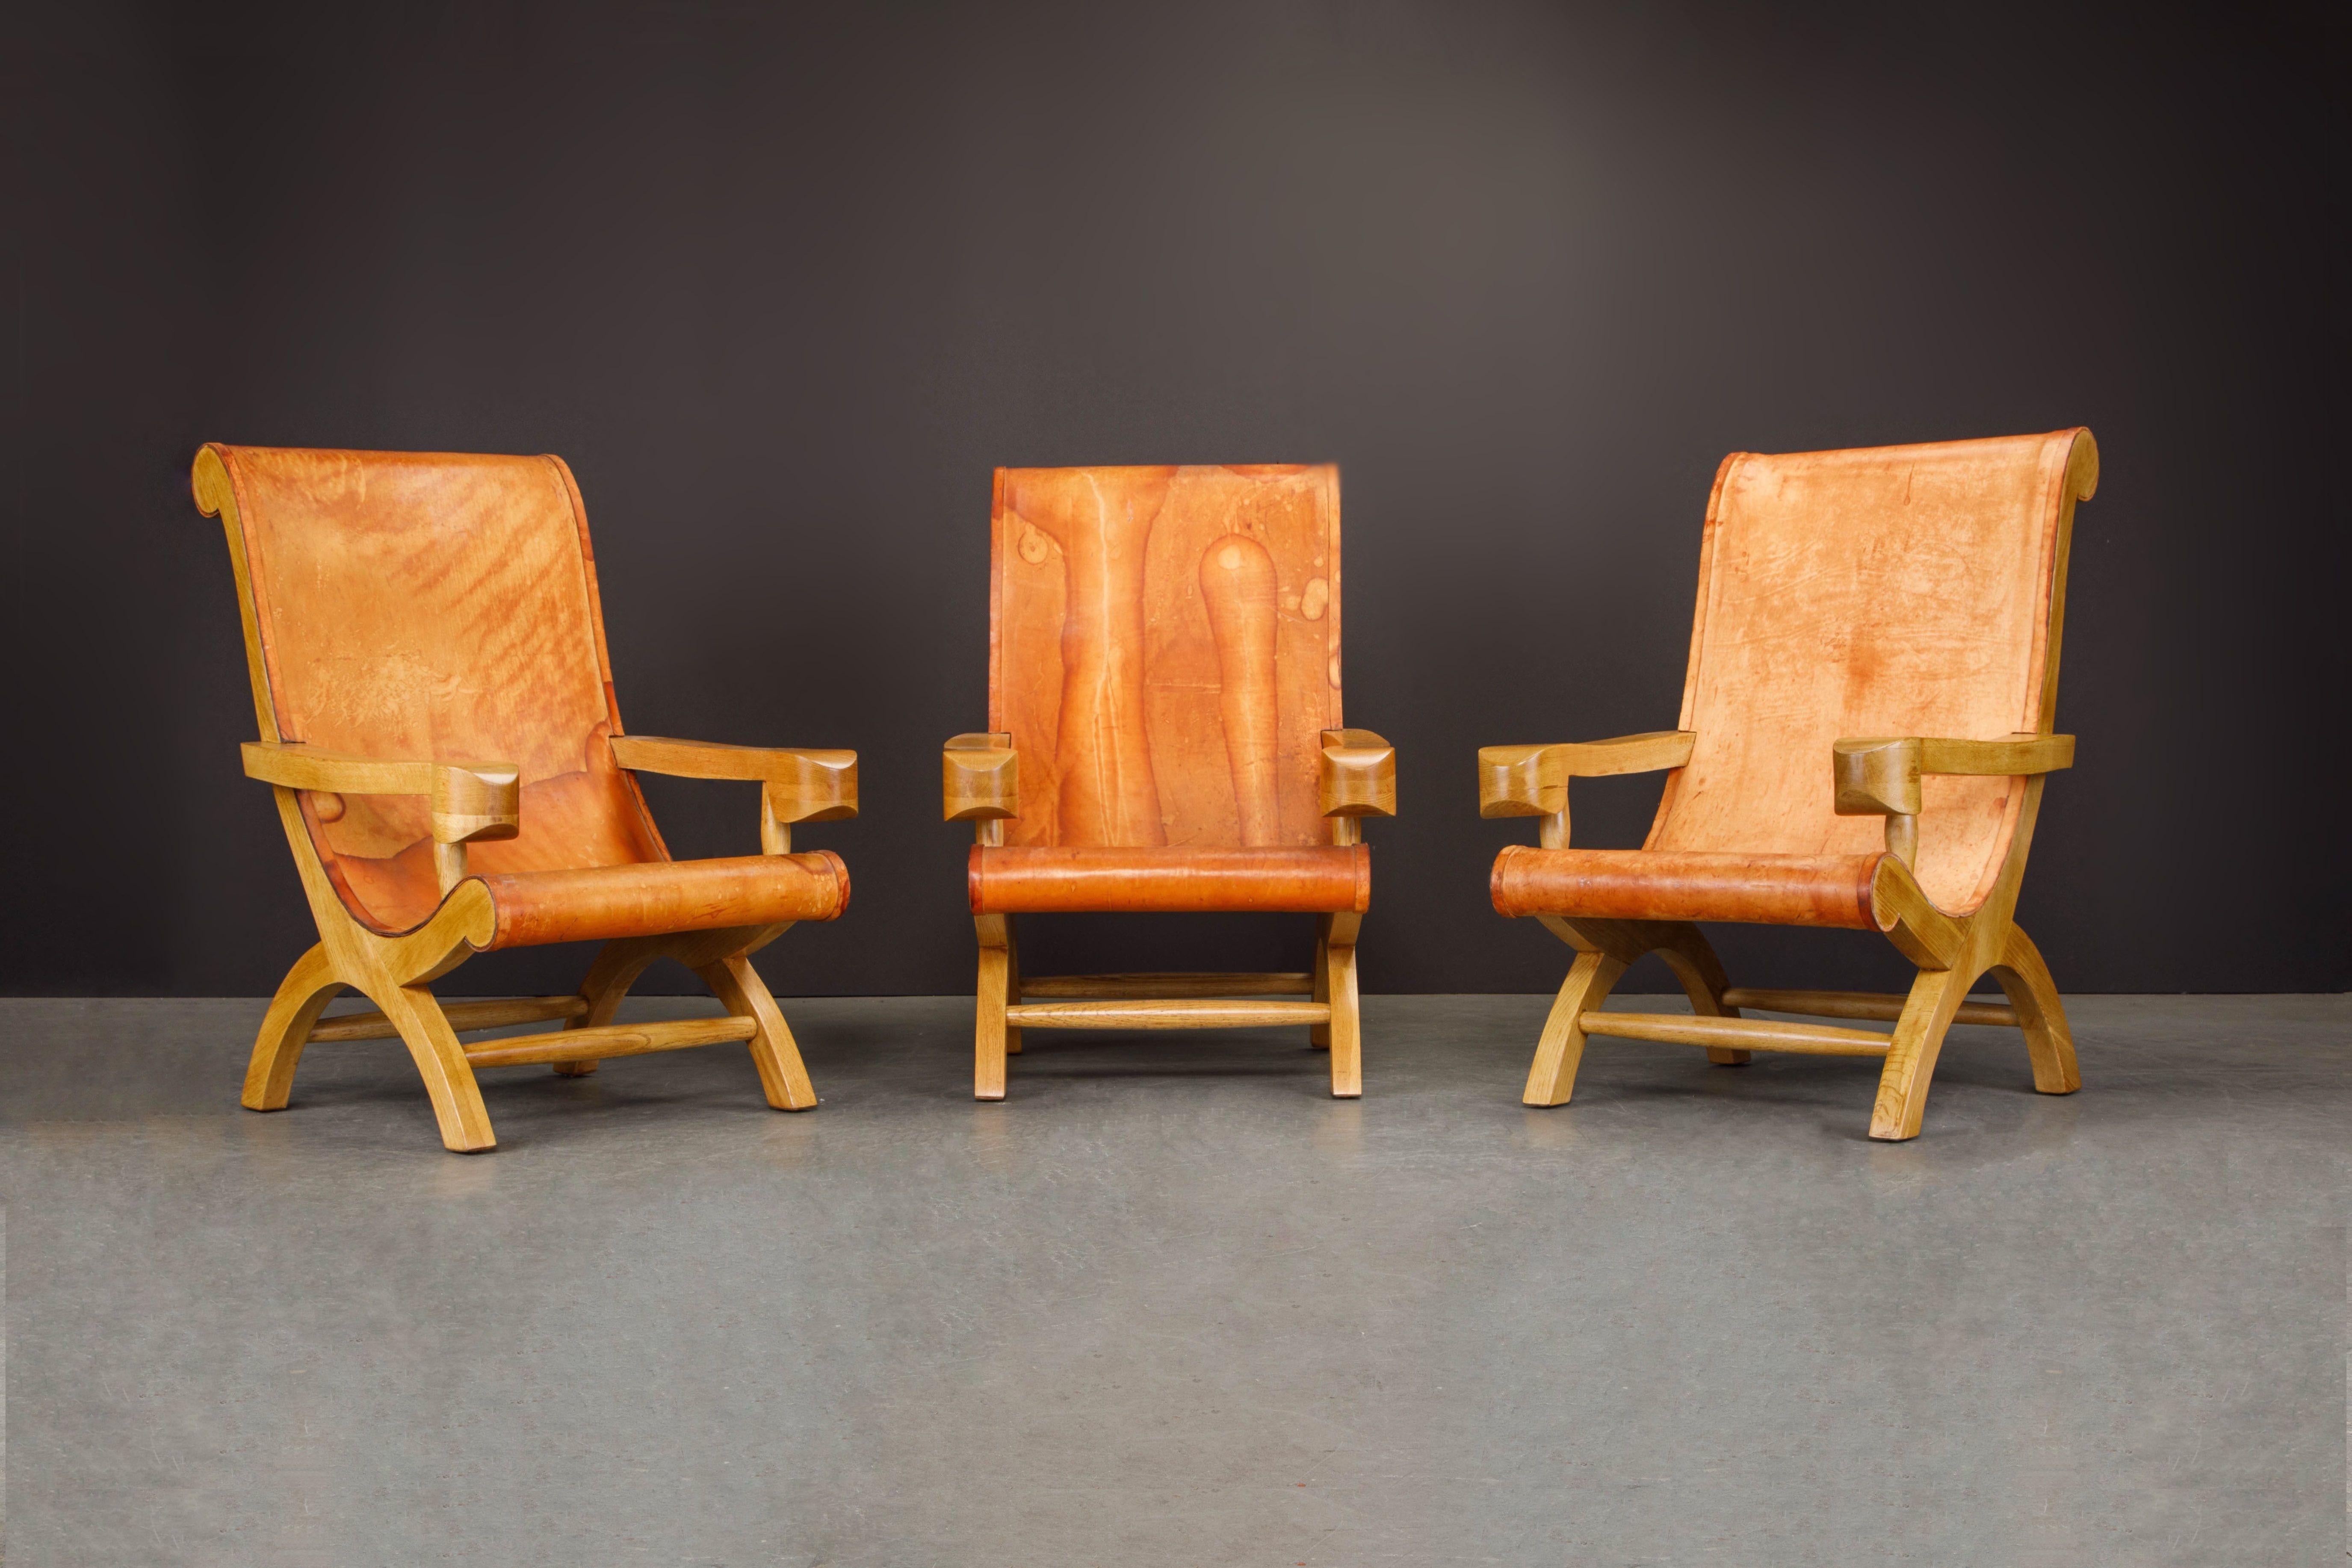 An incredible 'Butaque' armchair attributed to Clara Porset in gorgeous patinated leather and cypress wood, designed in 1947 Mexico. We have three chairs available, listed and priced individually. 

In the mid-1930s after moving to Mexico, Cuban